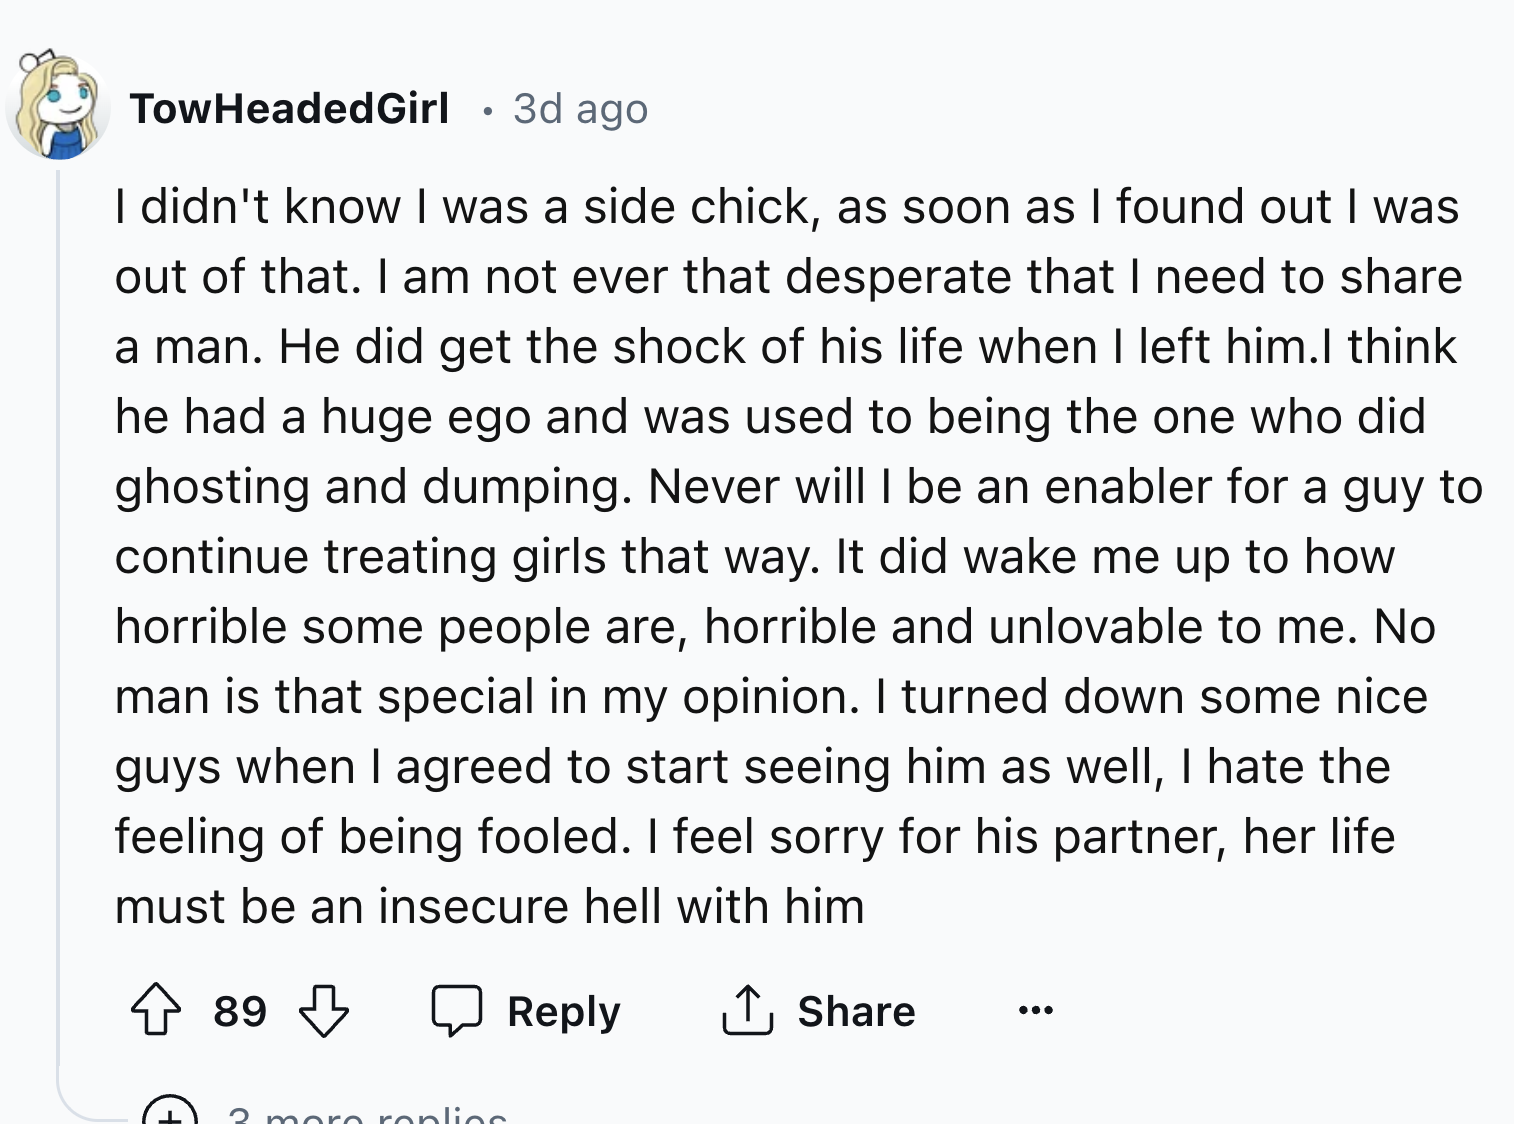 screenshot - TowHeadedGirl 3d ago I didn't know I was a side chick, as soon as I found out I was out of that. I am not ever that desperate that I need to a man. He did get the shock of his life when I left him.I think he had a huge ego and was used to bei